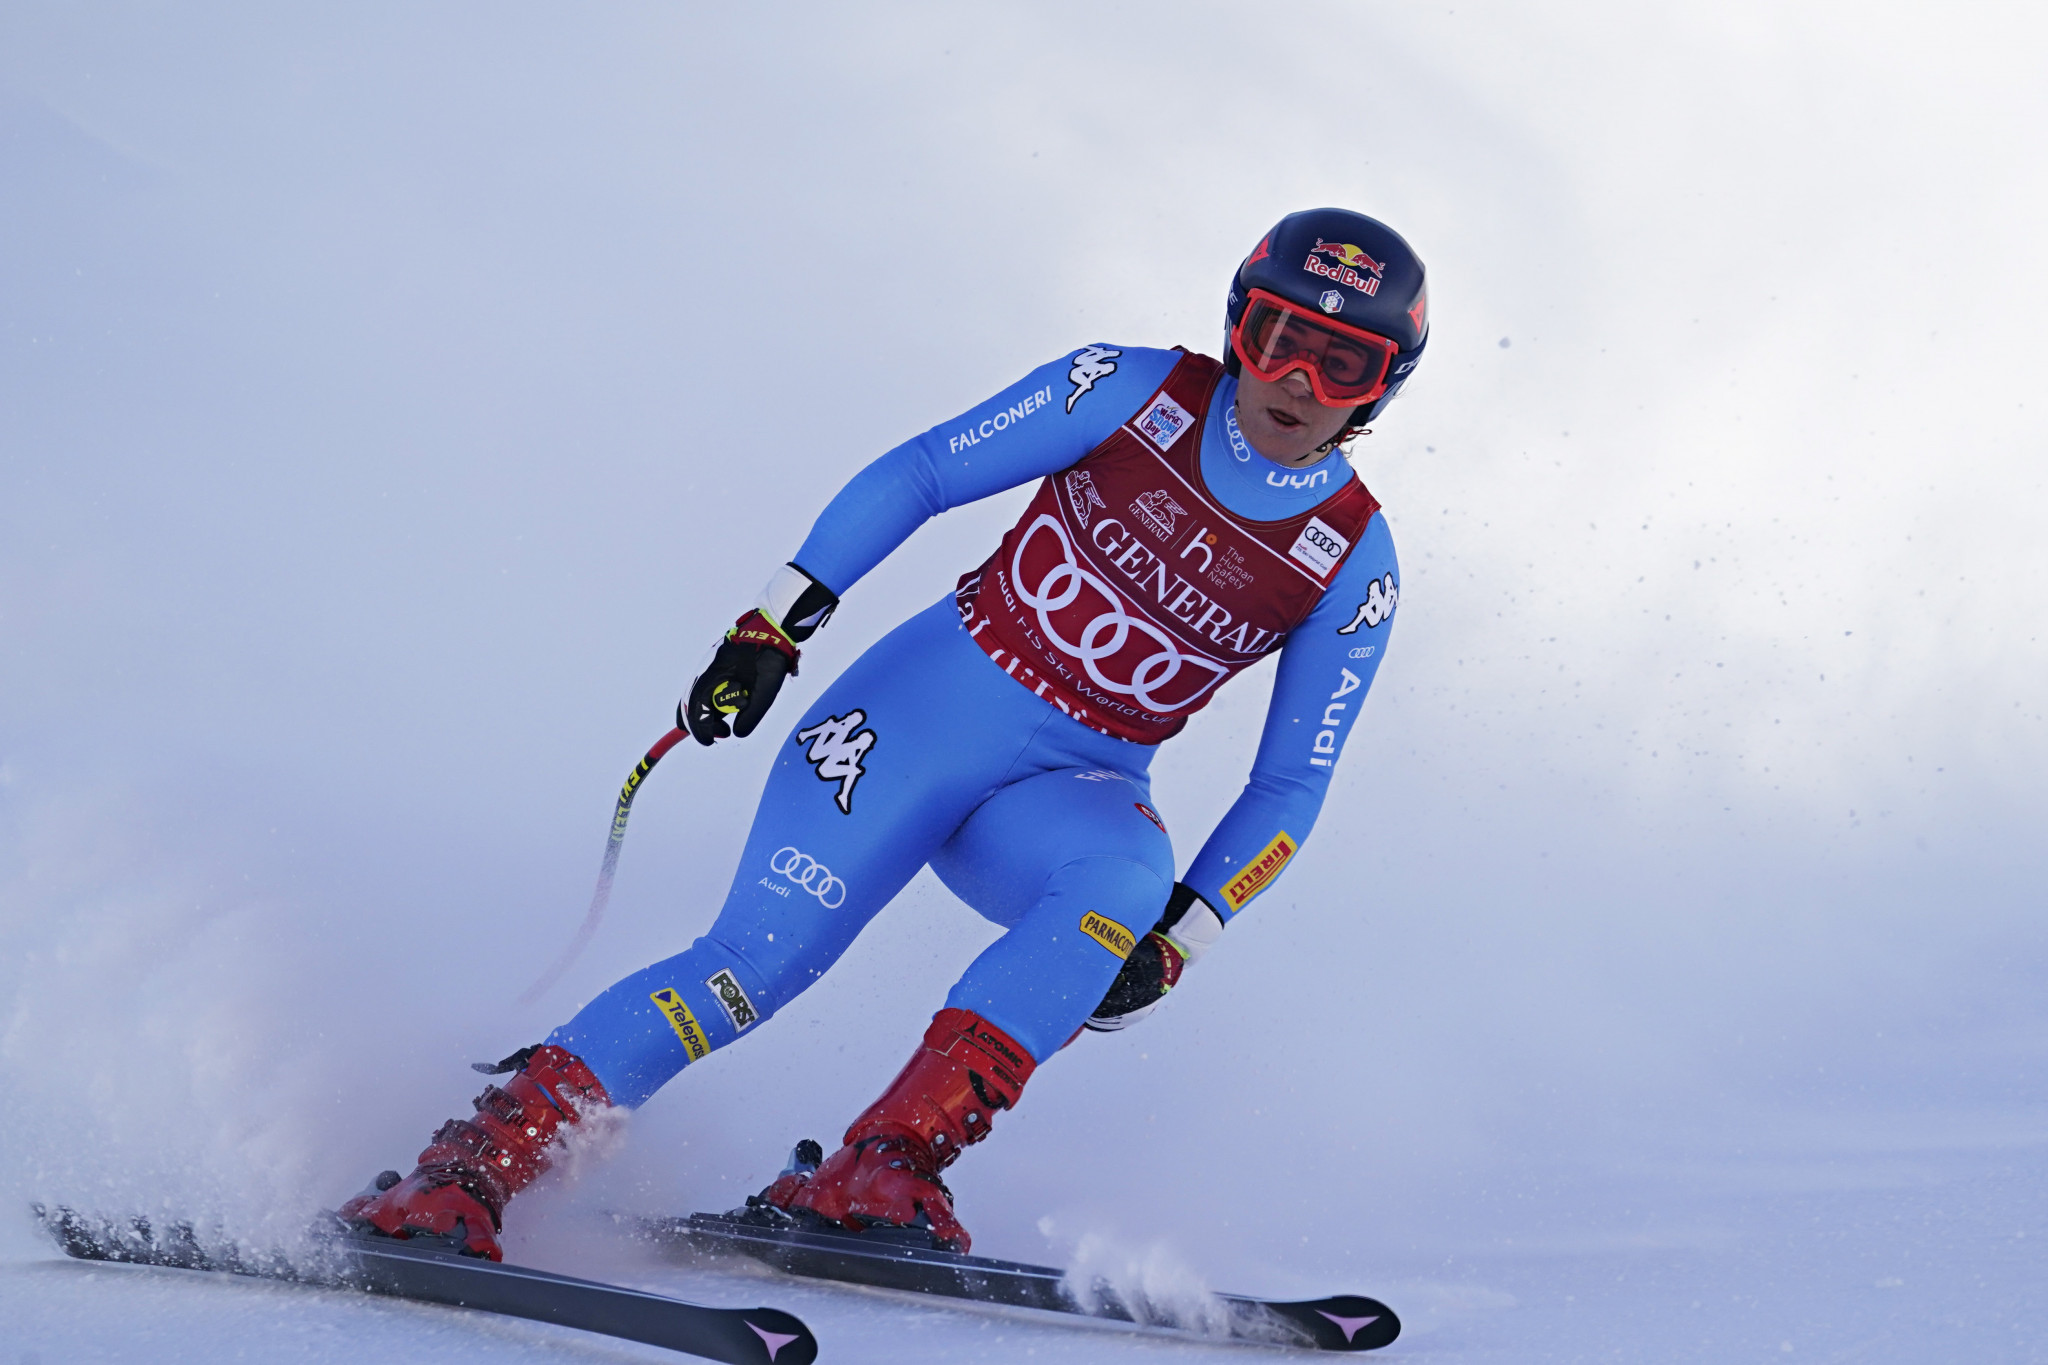 Sofia Goggia of Italy clocked 1min 19.23sec to secure victory in the super-G discipline ©Getty Images